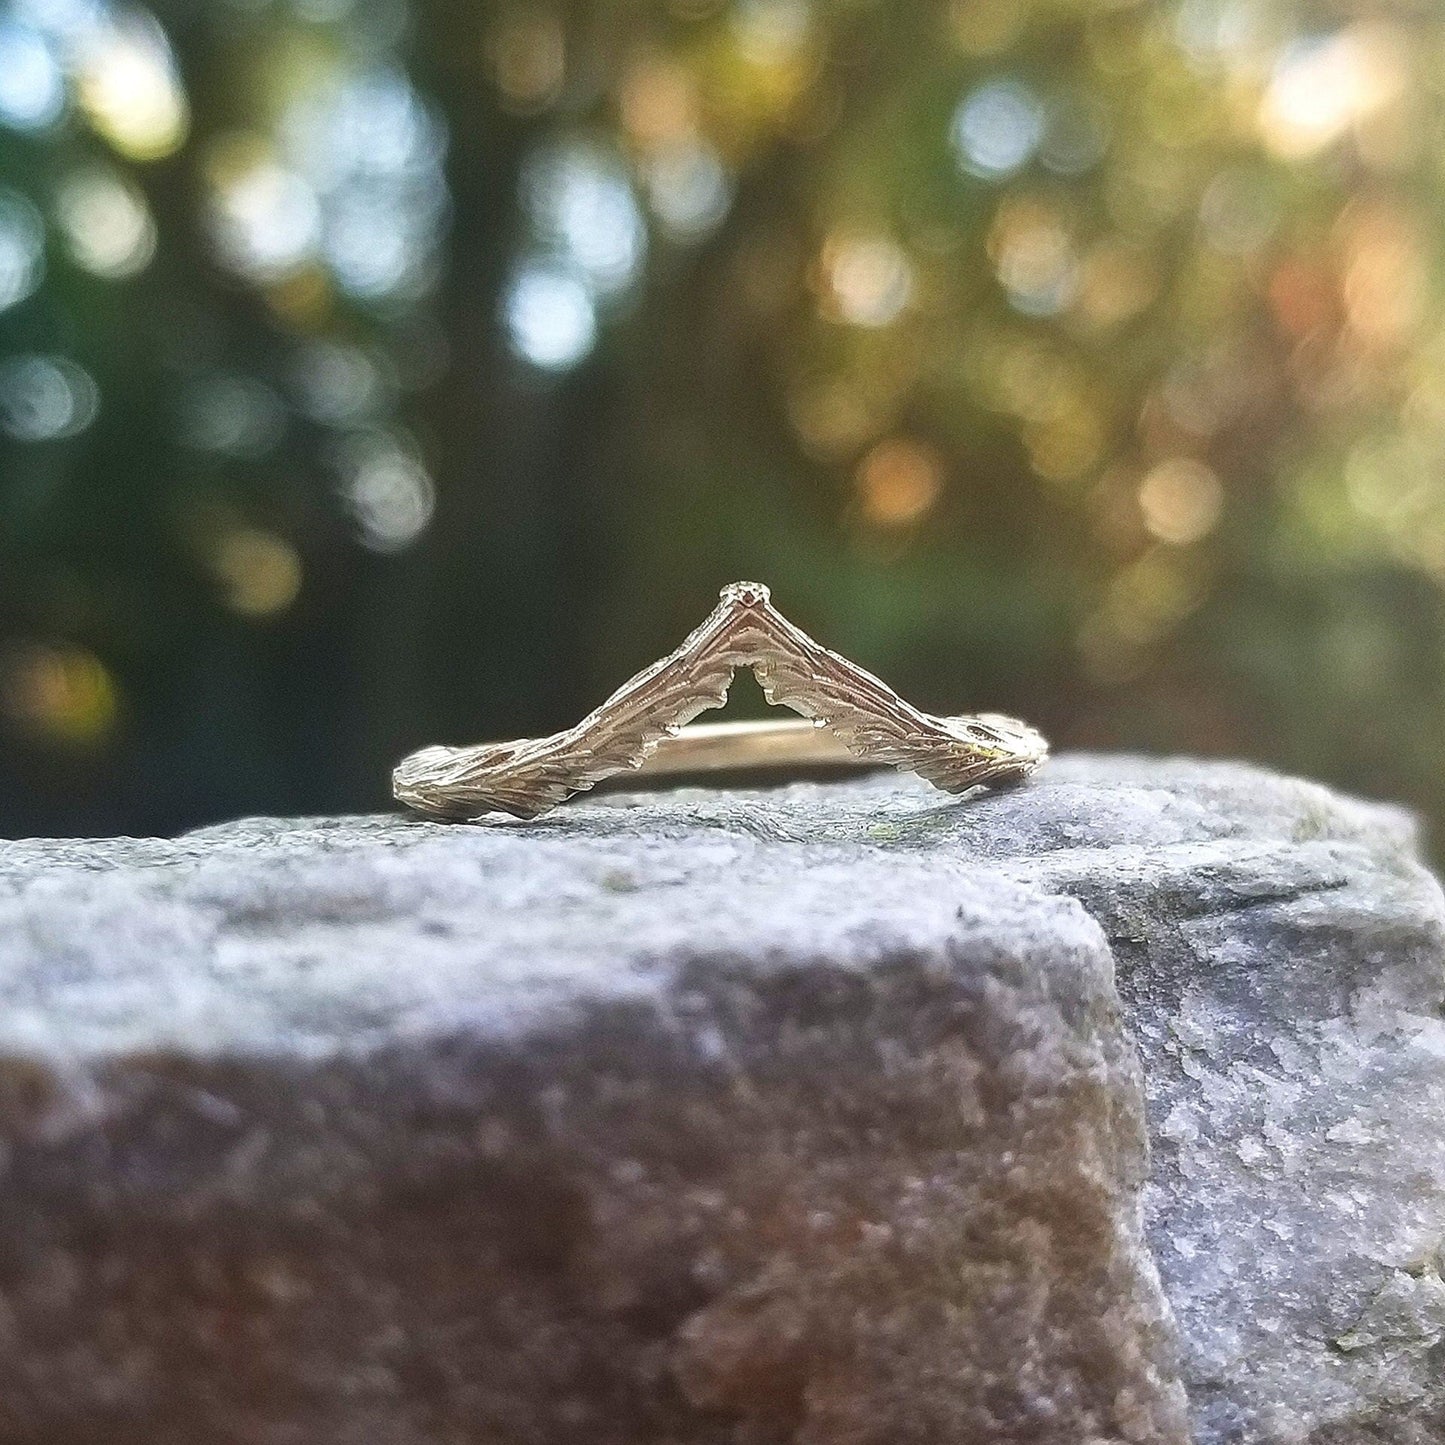 14k Gold Forest Chevron - Nature Stacking Wedding Band - Pointed Side Band